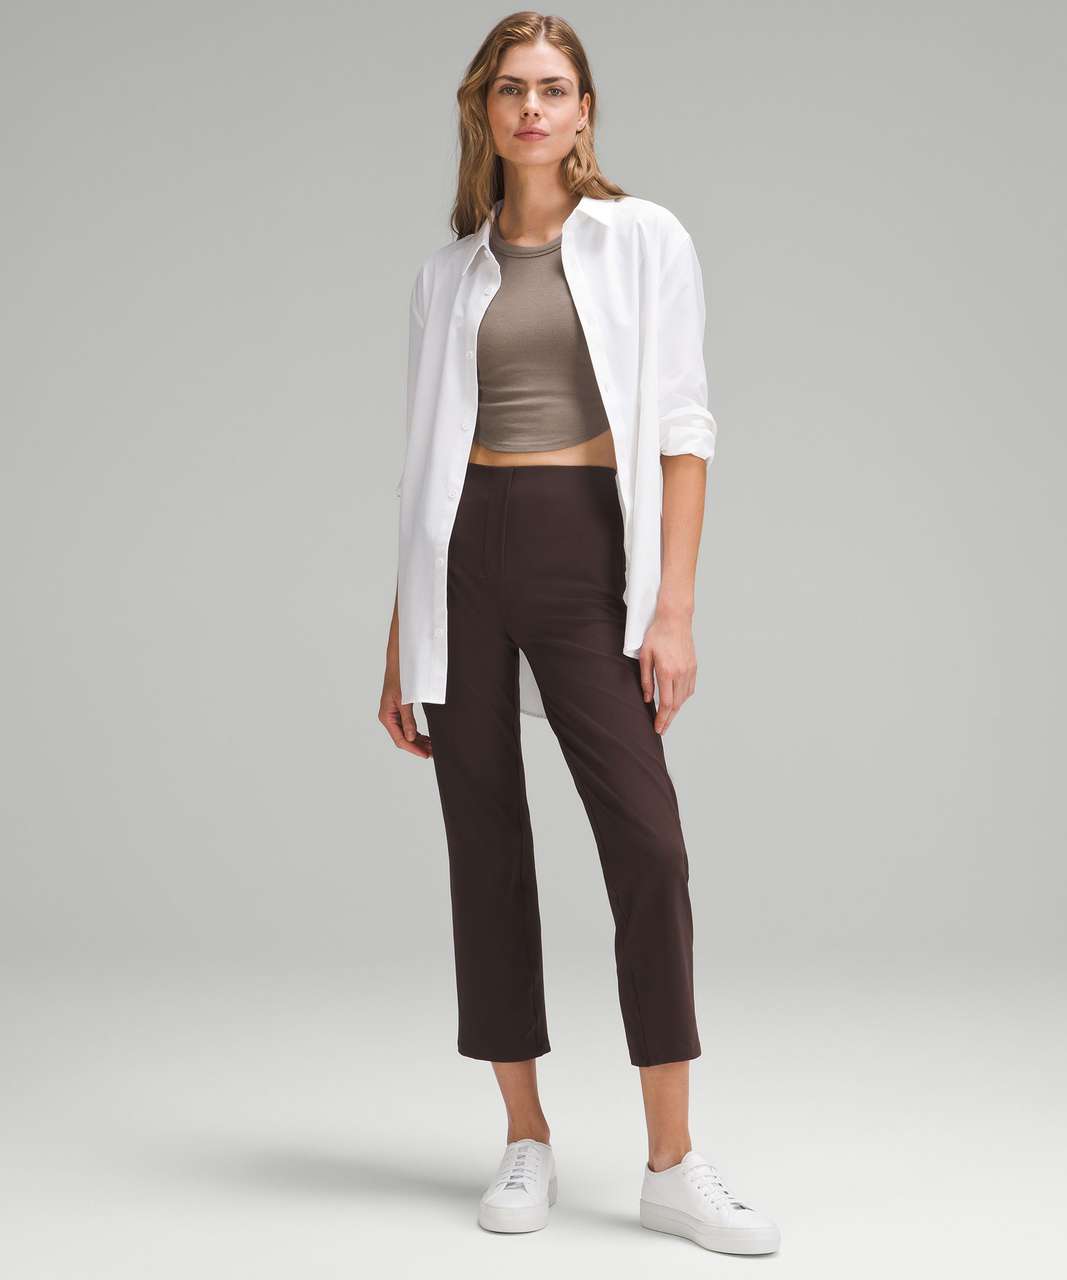 Lululemon Smooth Fit Pull-On High-Rise Cropped Pant - Espresso